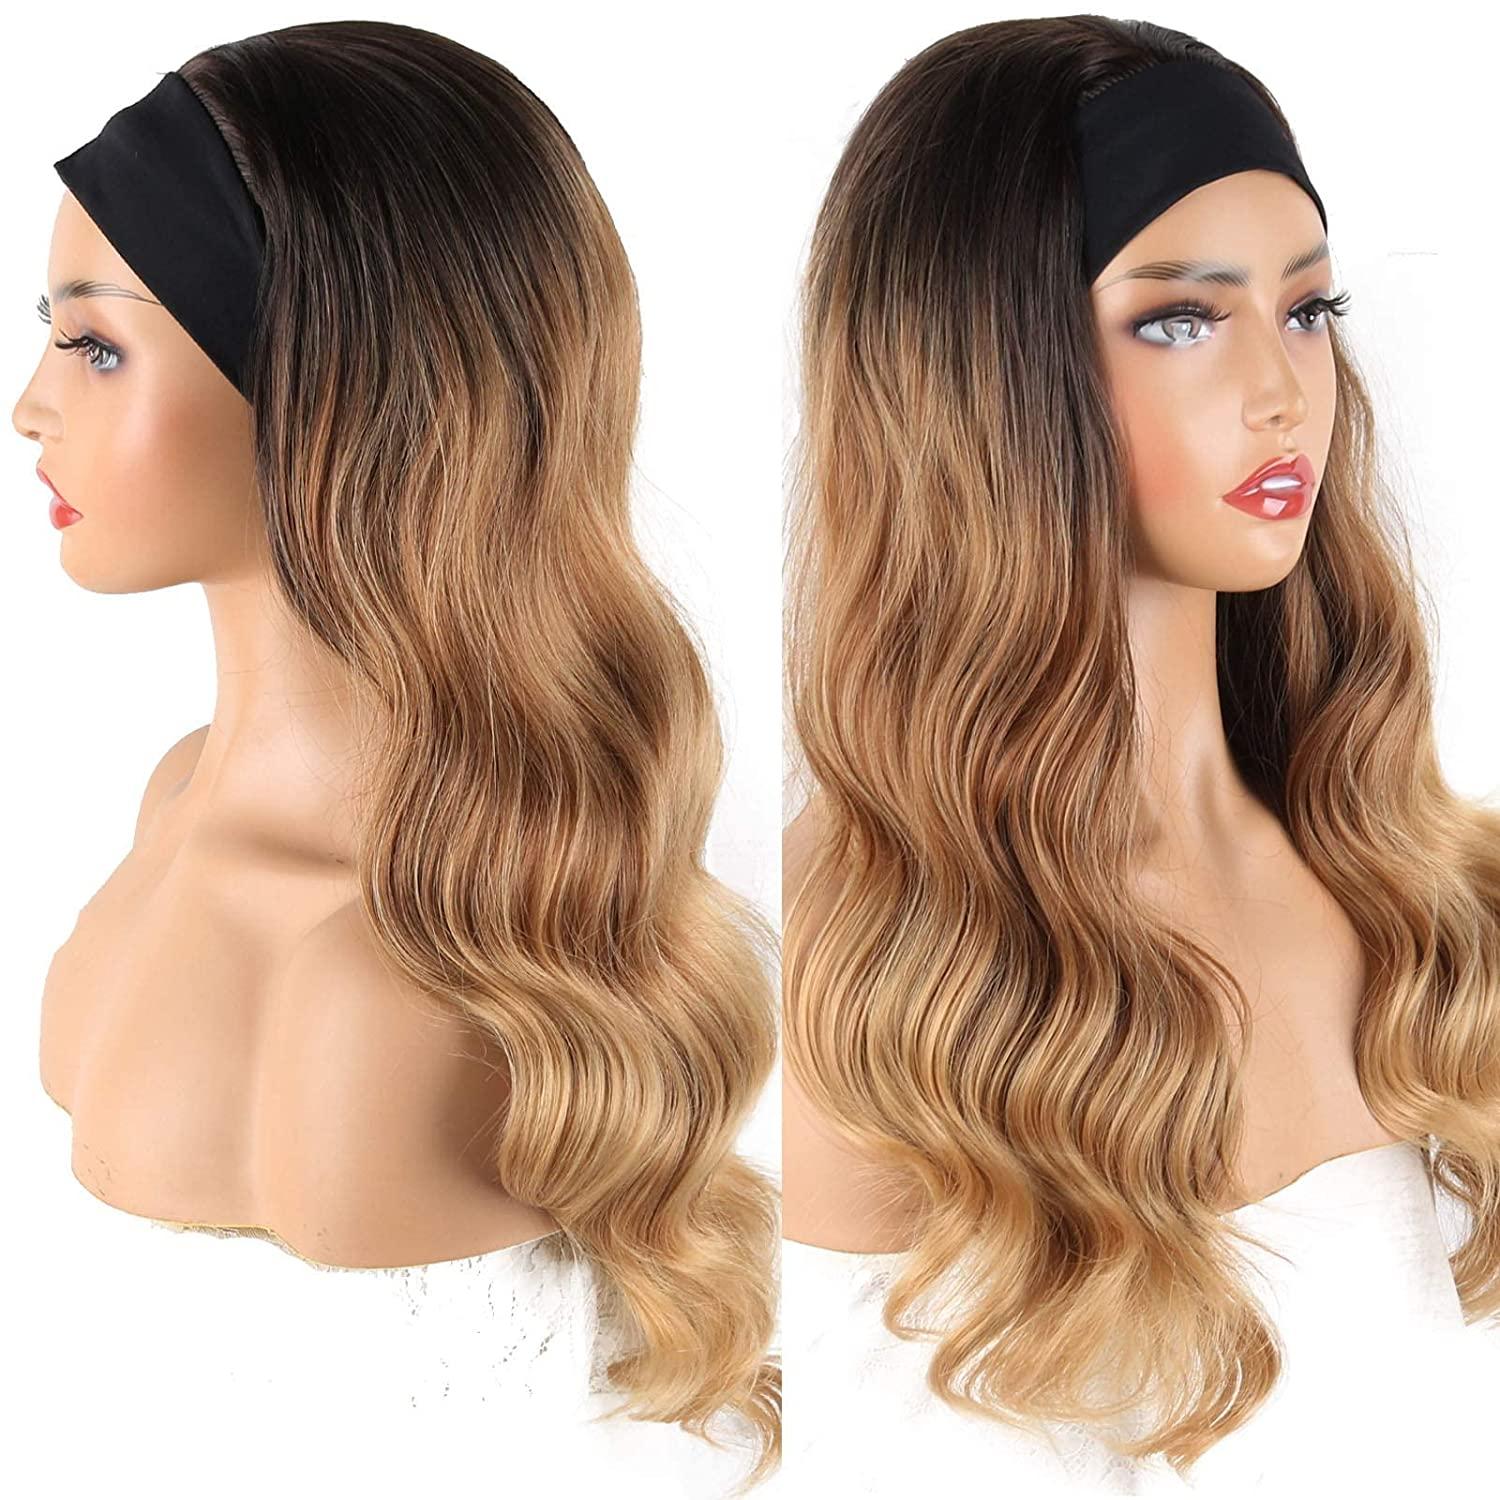 Lace Front Hair Wig Women Long Synthetic Loose Wave Ombre Brown